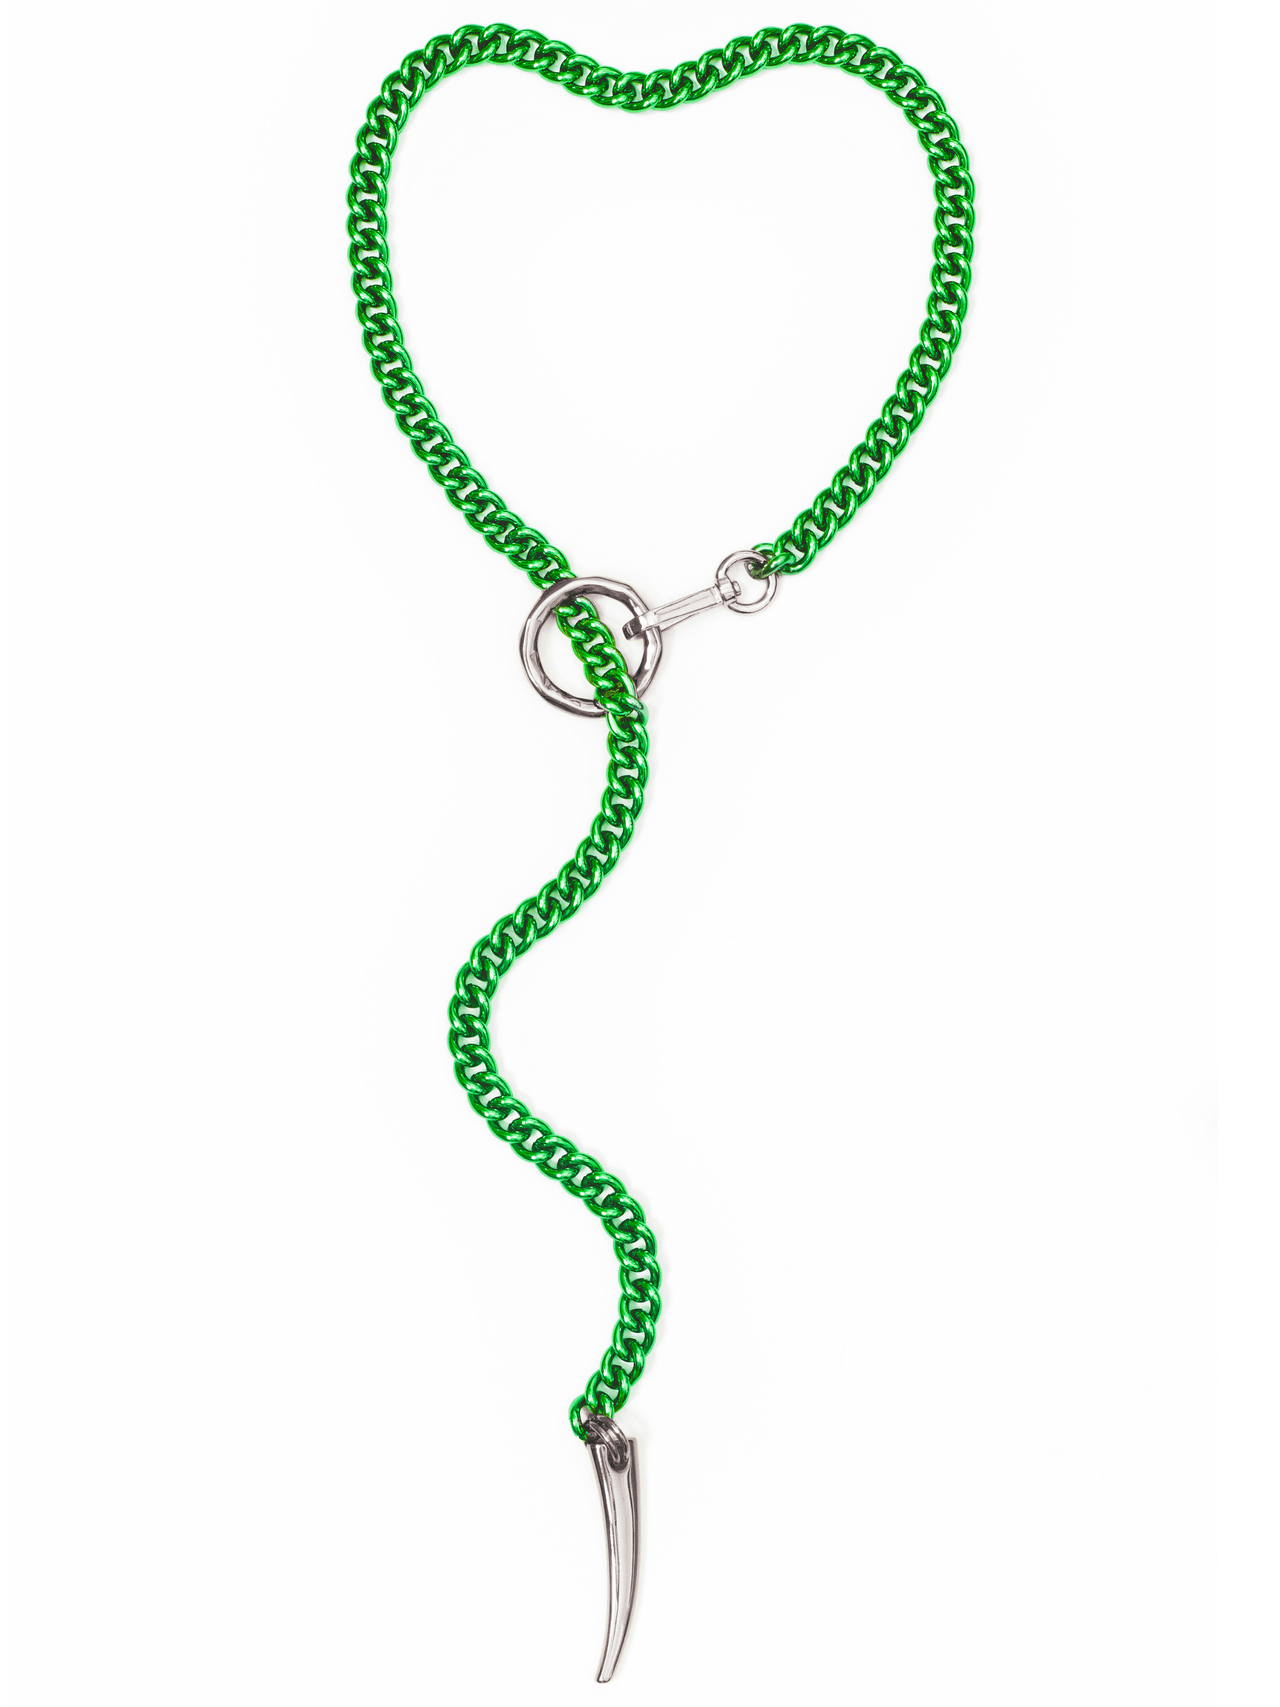 NEW! FORBIDDEN Necklace - Green - Limited Edition